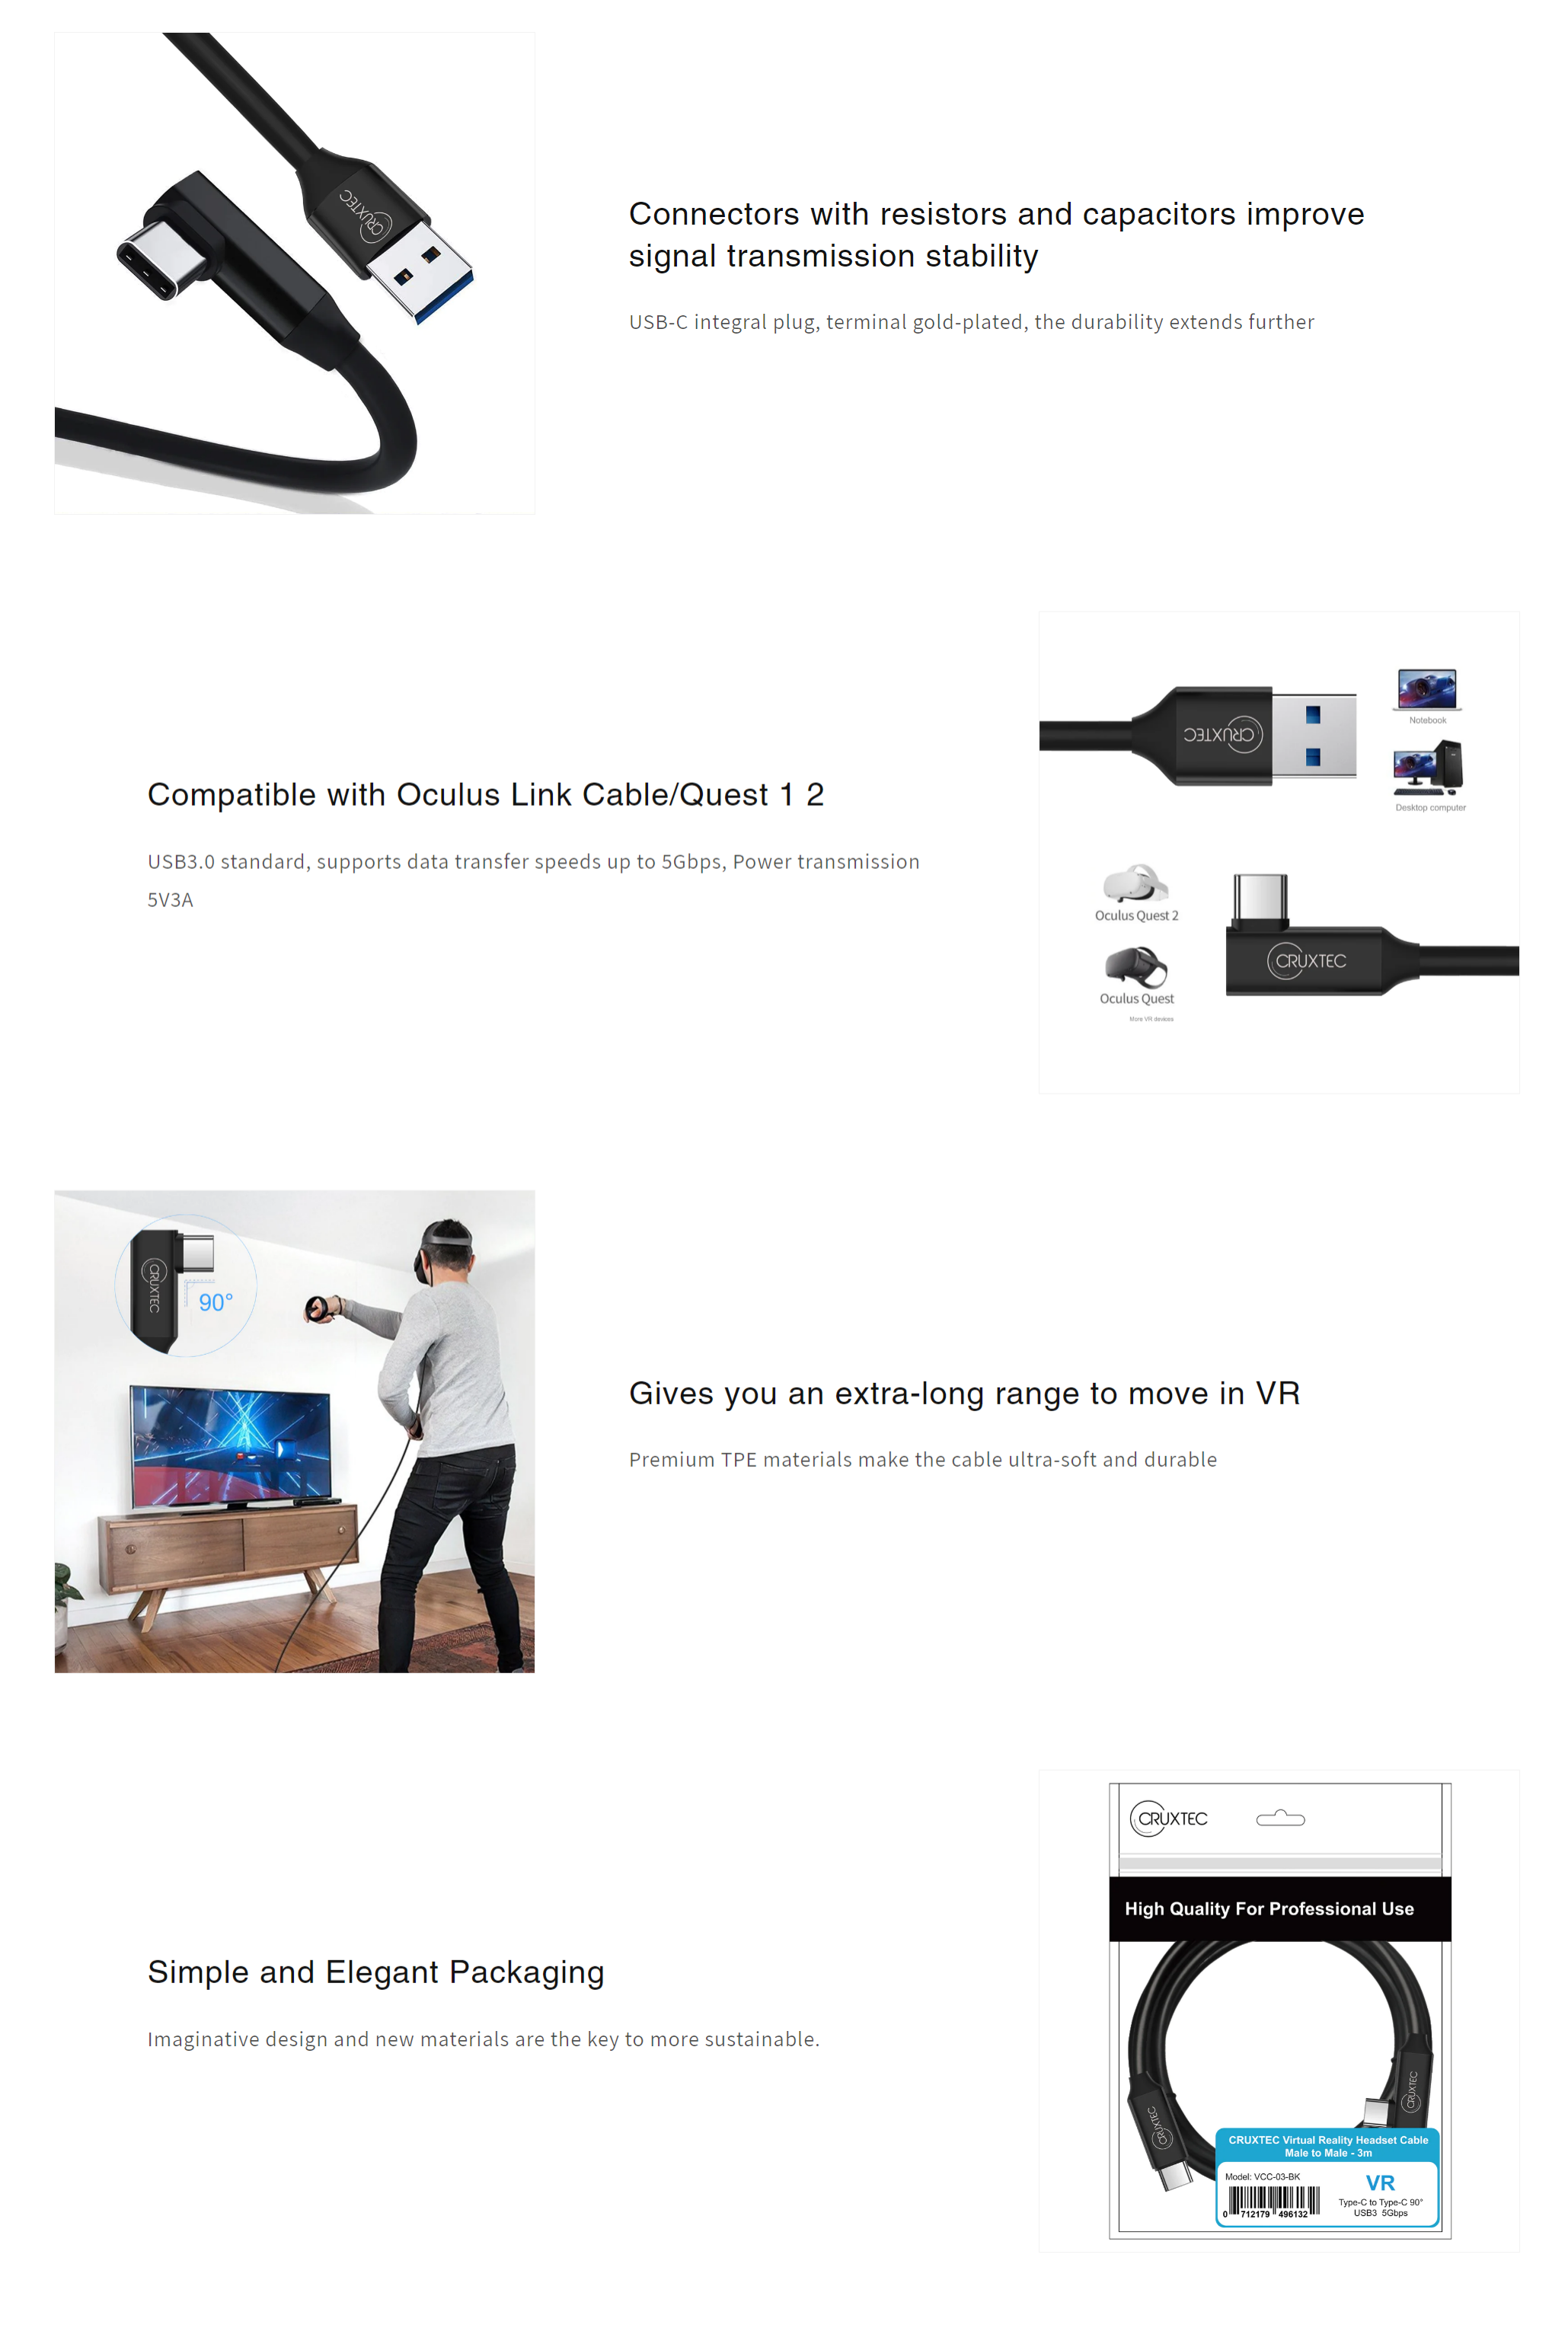 A large marketing image providing additional information about the product Cruxtec USB-A to USB-C 90 Degree Angle VR Cable - 5m - Additional alt info not provided